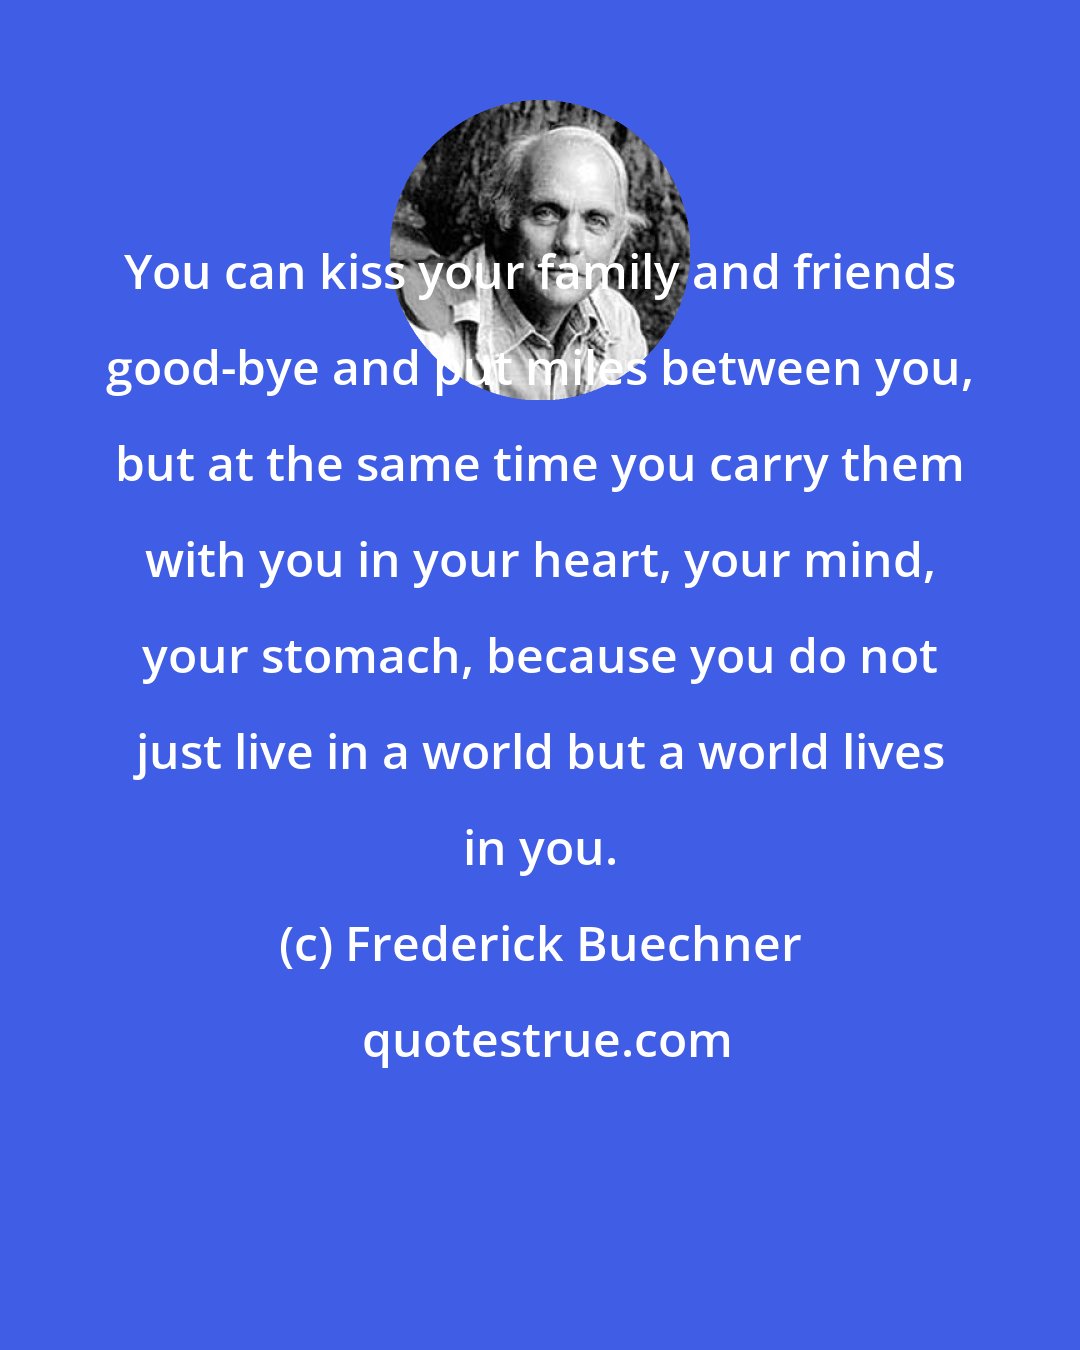 Frederick Buechner: You can kiss your family and friends good-bye and put miles between you, but at the same time you carry them with you in your heart, your mind, your stomach, because you do not just live in a world but a world lives in you.